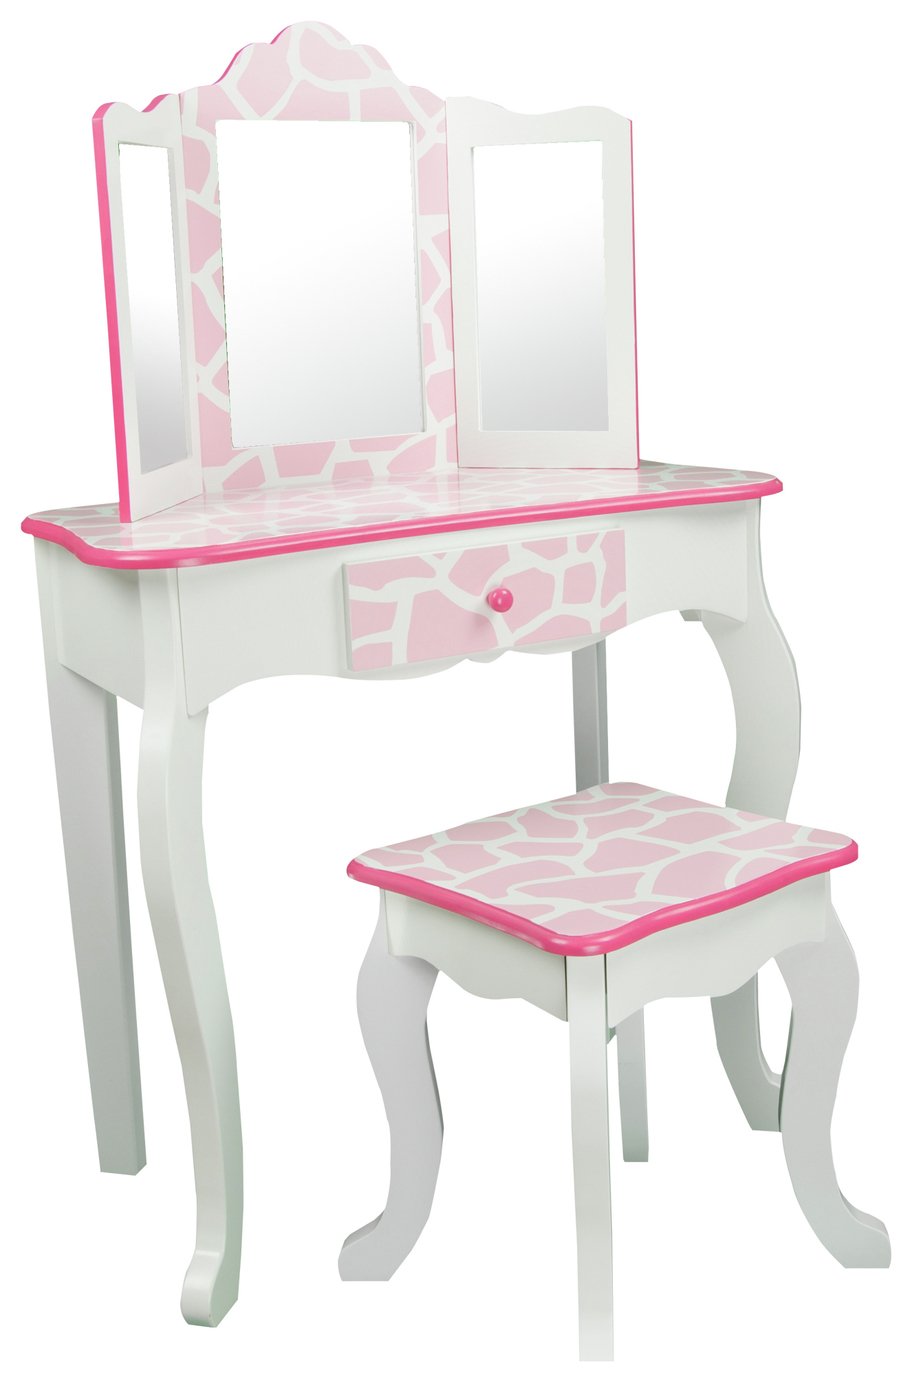 Teamson Kids Gisele Giraffe Vanity Table and Stool at Argos review